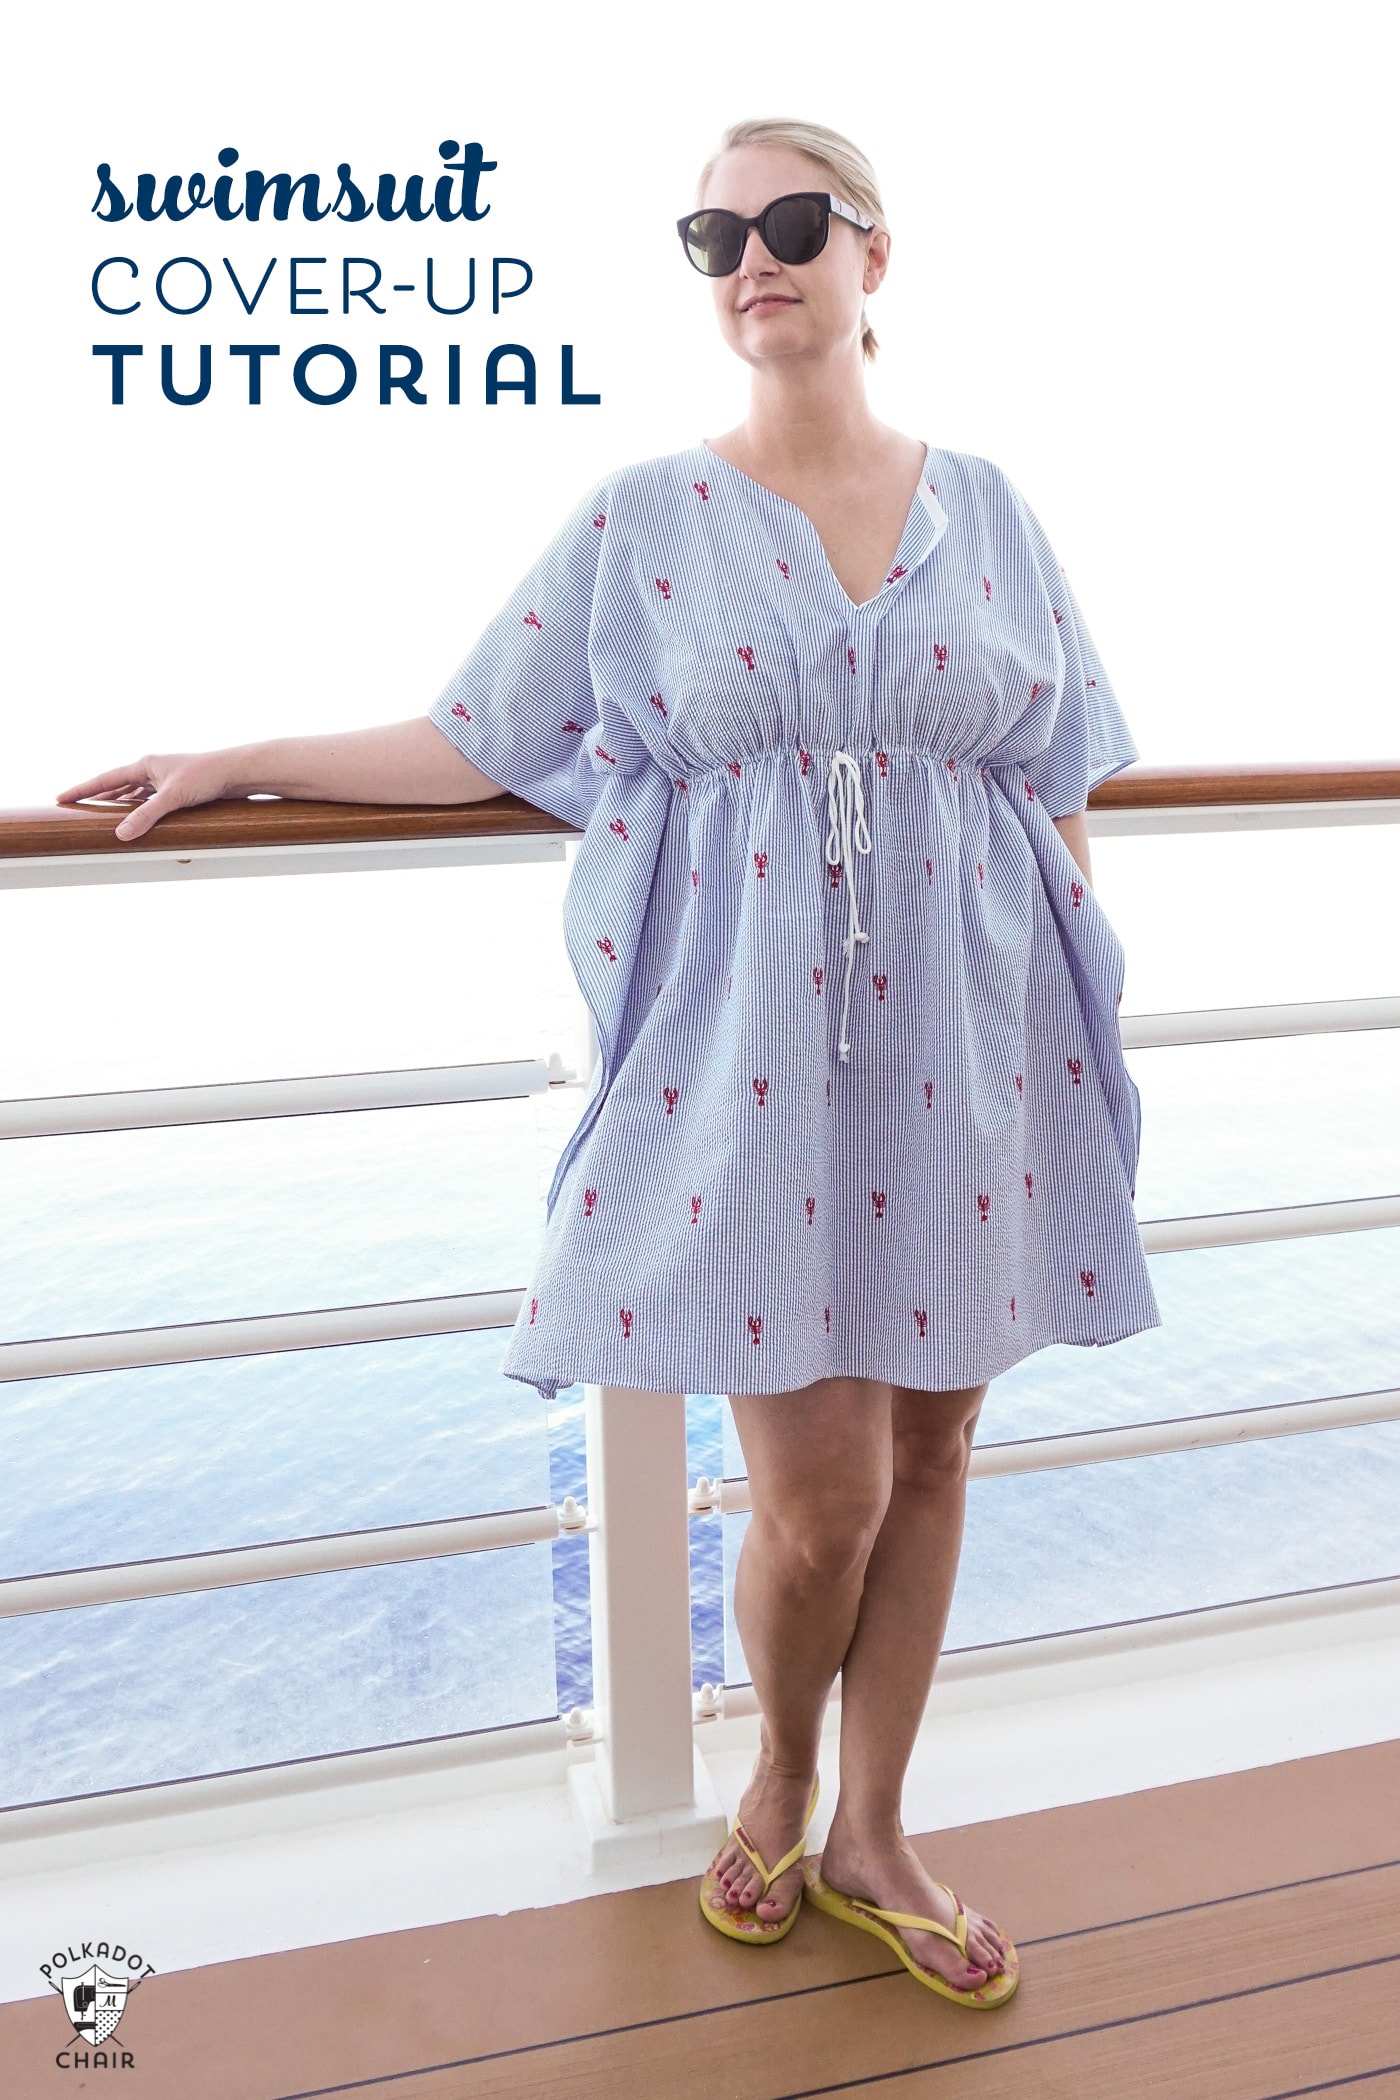 Make a Cute Swimsuit Cover-Up with this Free Sewing Pattern